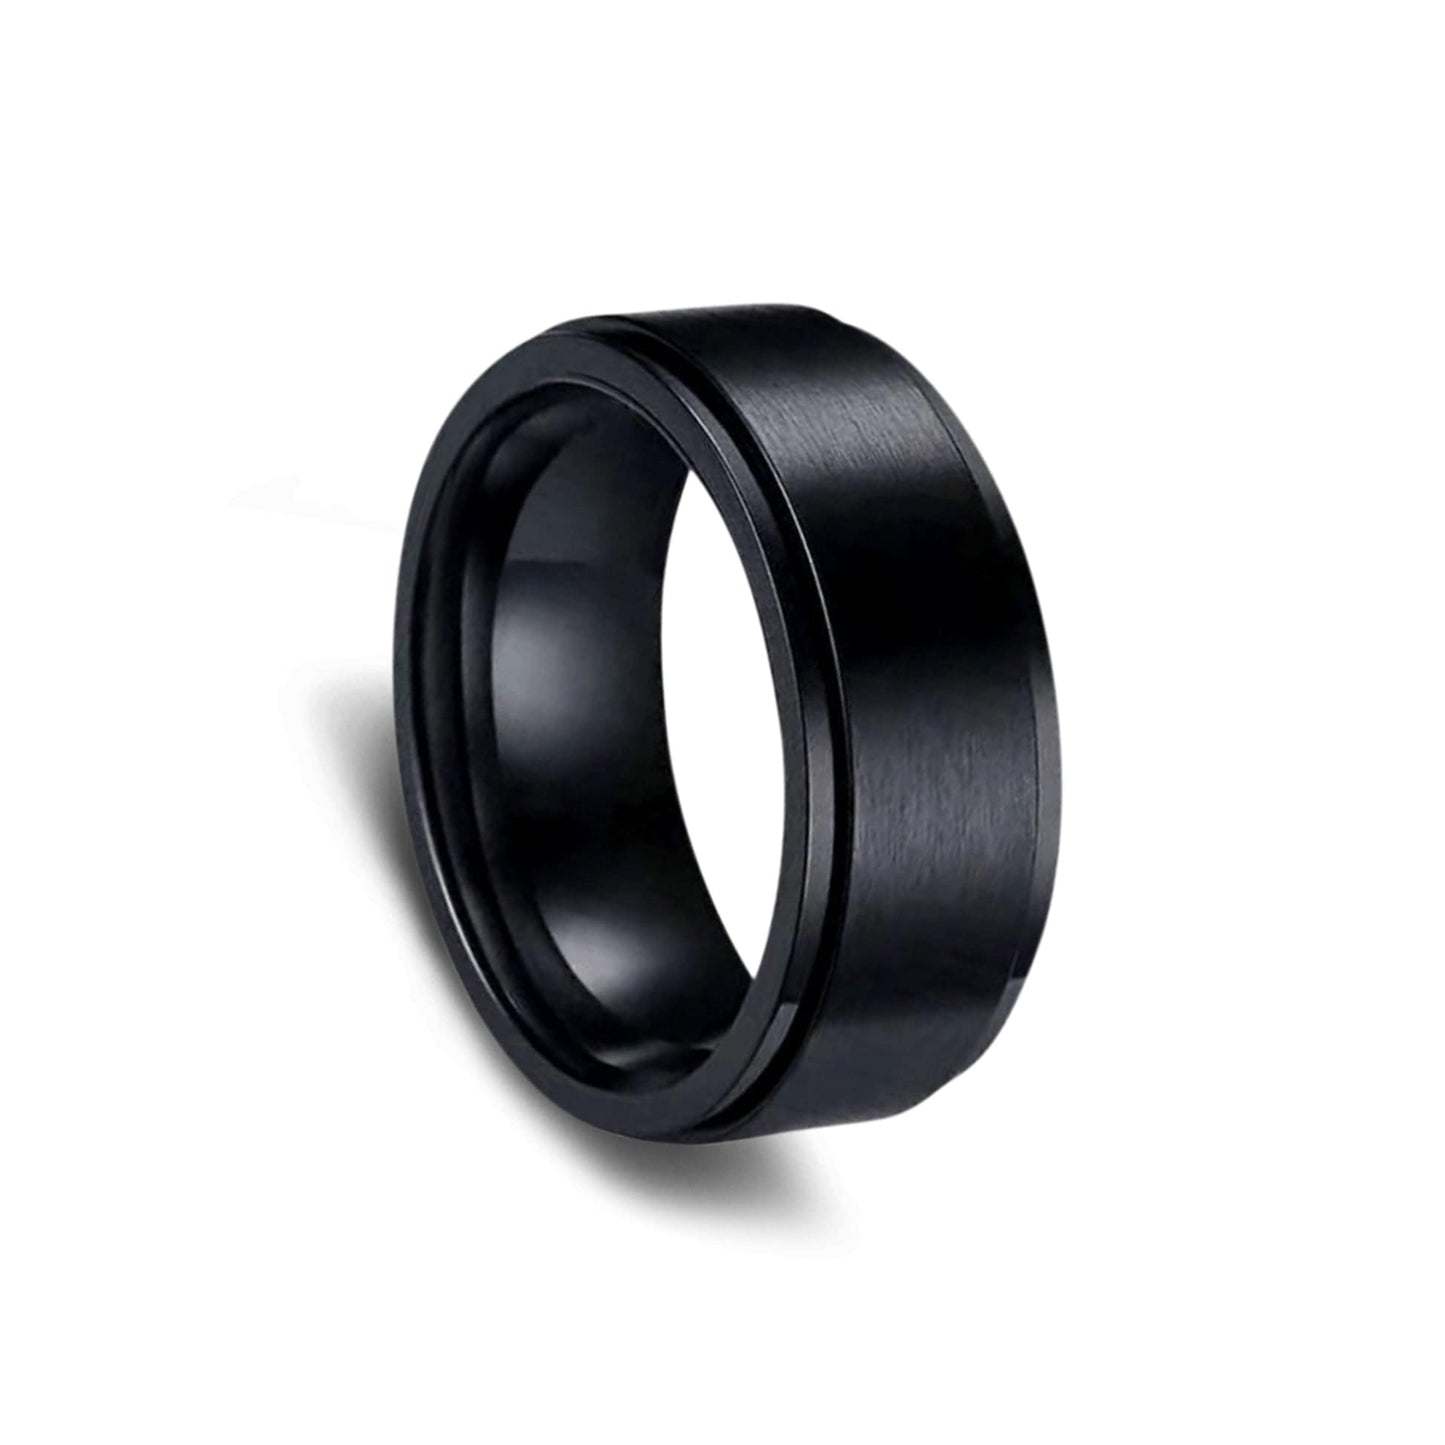 The Fusion Collection Men's Rotating Ring - Black Sterling Silver Fidget Rotating Spinner Ring